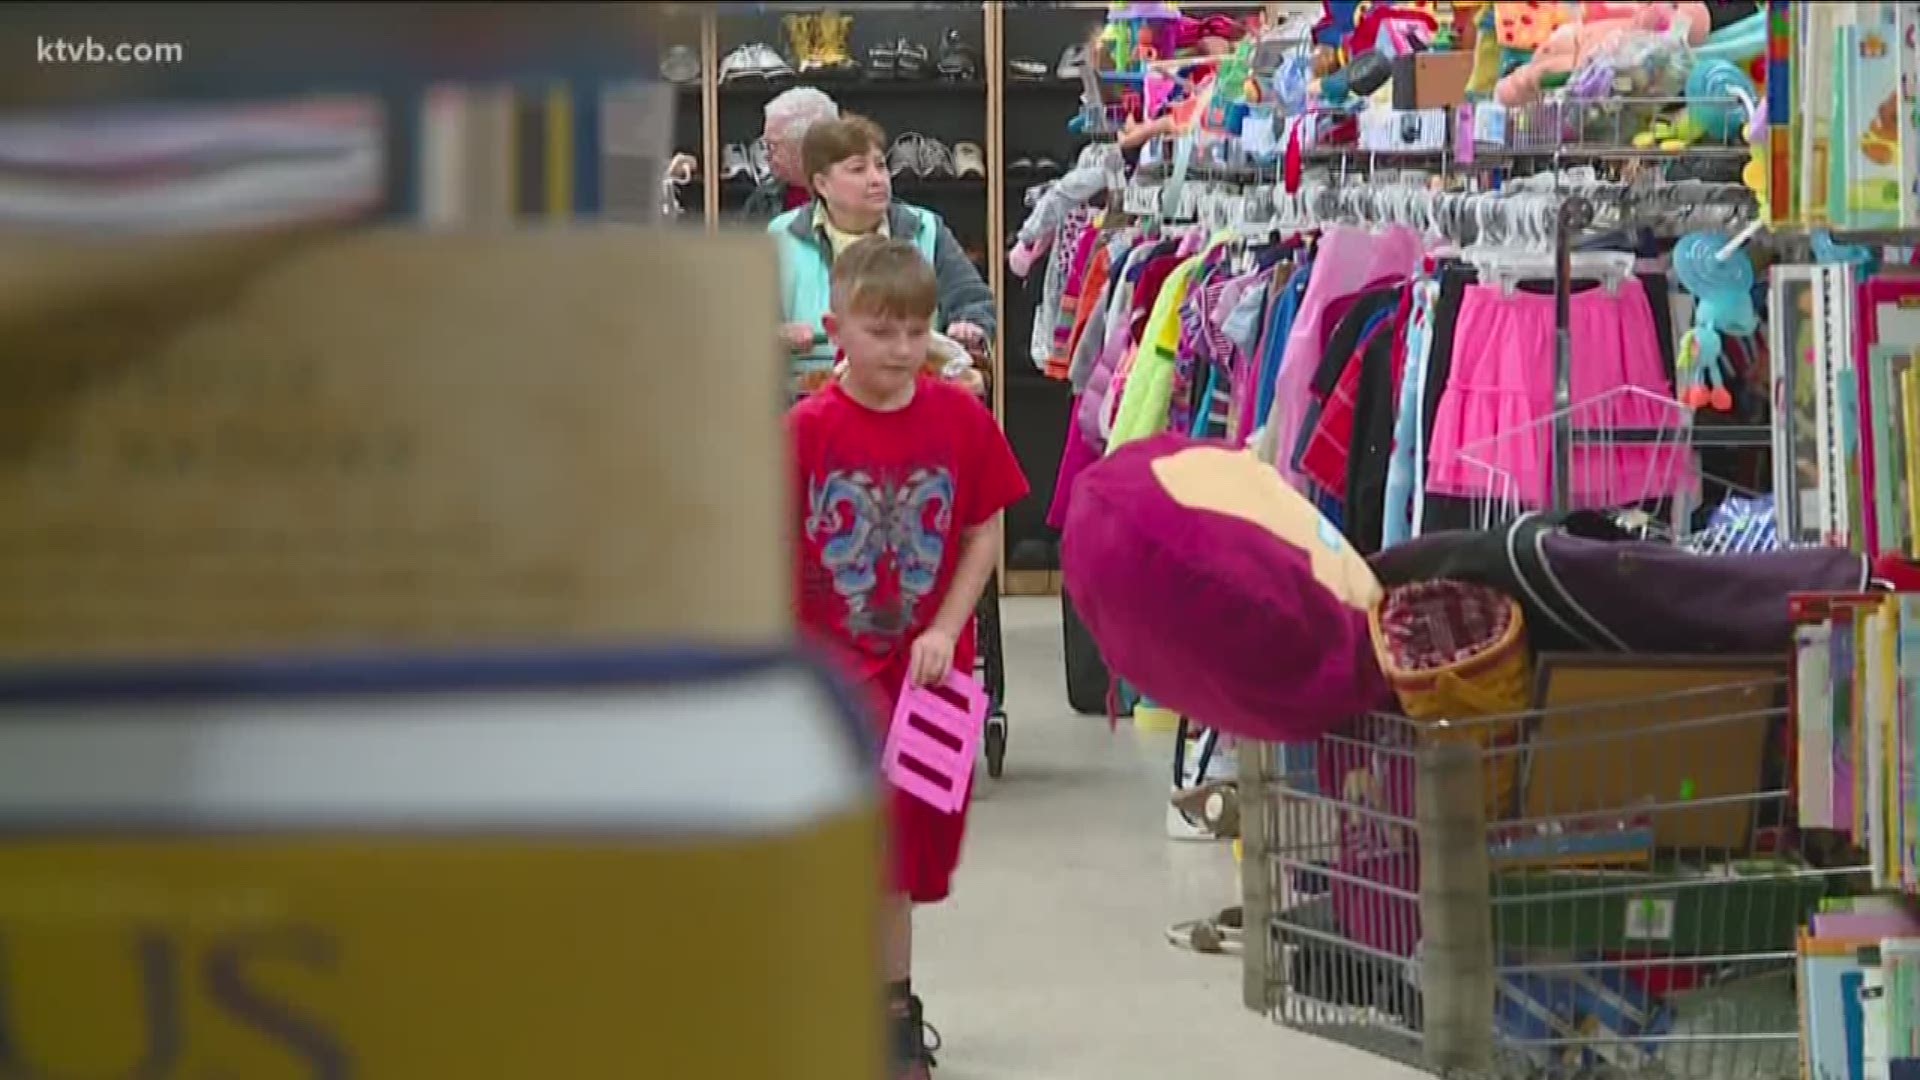 St. Vincent de Paul is seeing a surge of donations into their thrift stores, attributing the bulk of it to a new Netflix series called 'Tidying Up'. This uptick not only helps customers but also people who turn to the organization for help with living expenses.